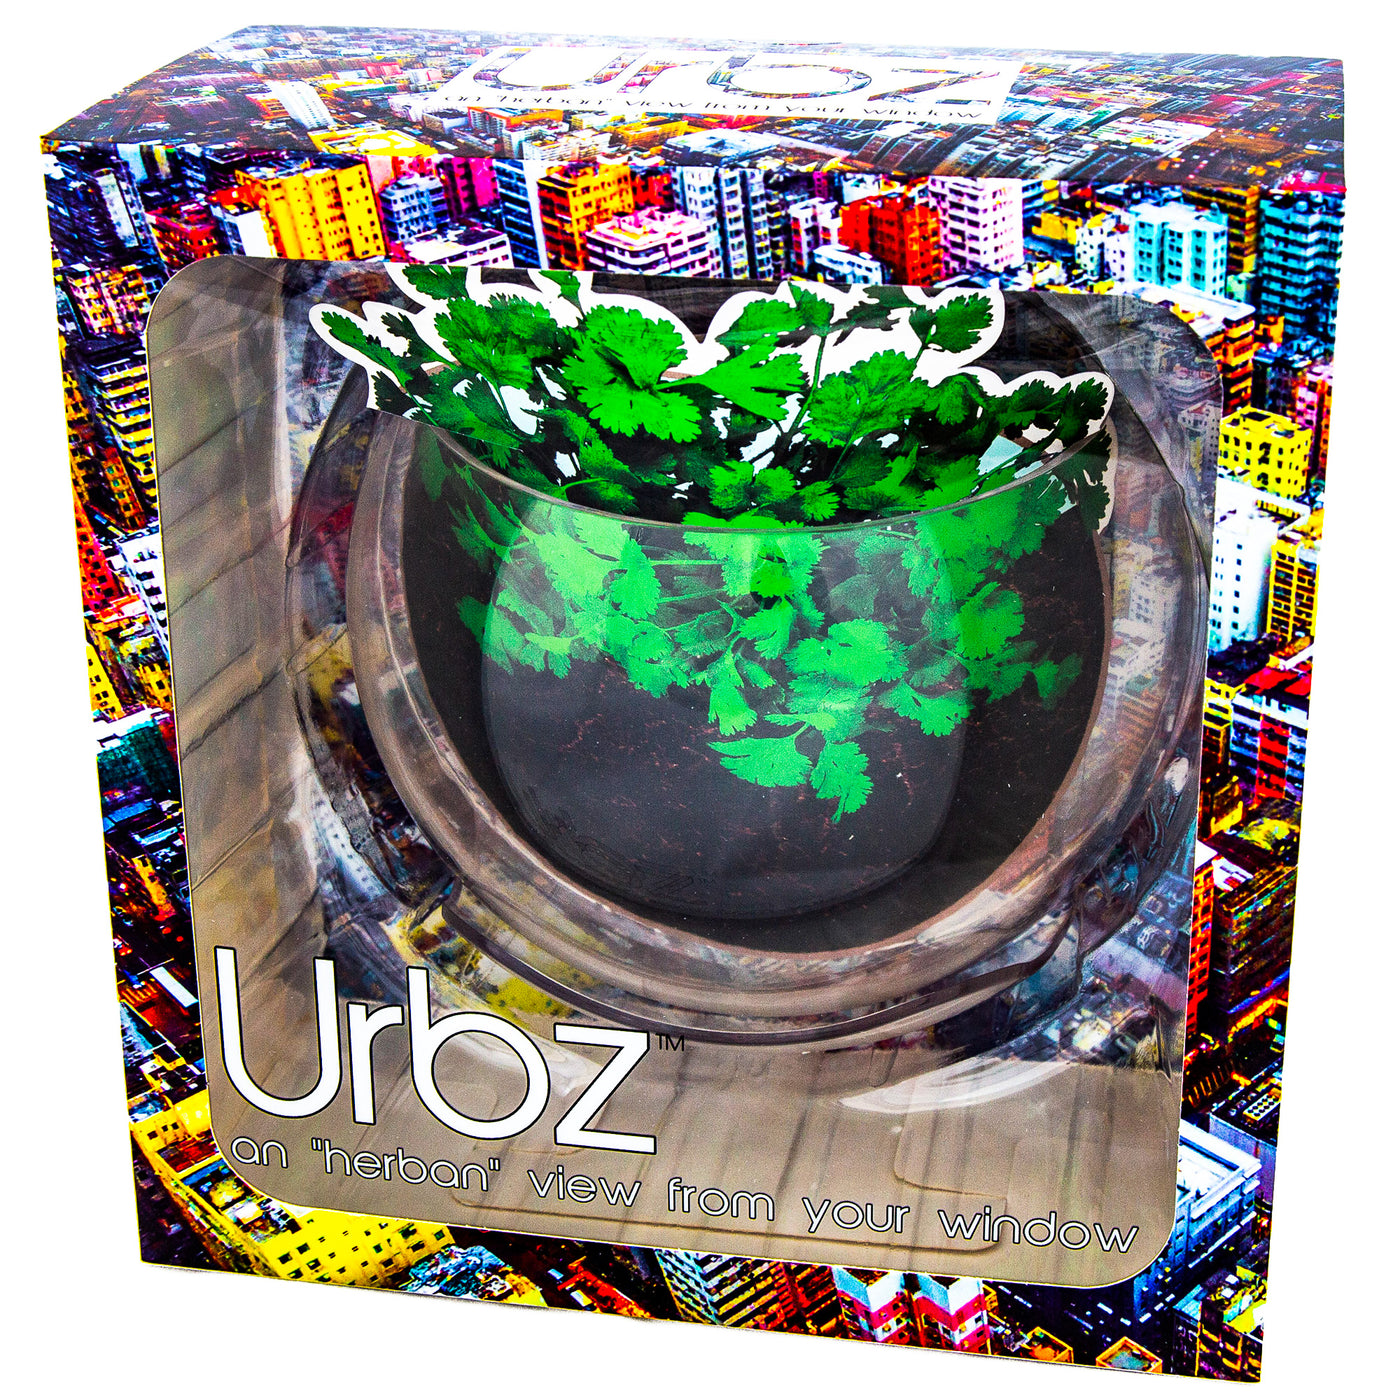 The Urbz planter box features an image by Hong Kong photographer Andy Yeung. This photo captures the modern urban landscape and demonstrates the potential to bring more Nature into the homes of millions of people.